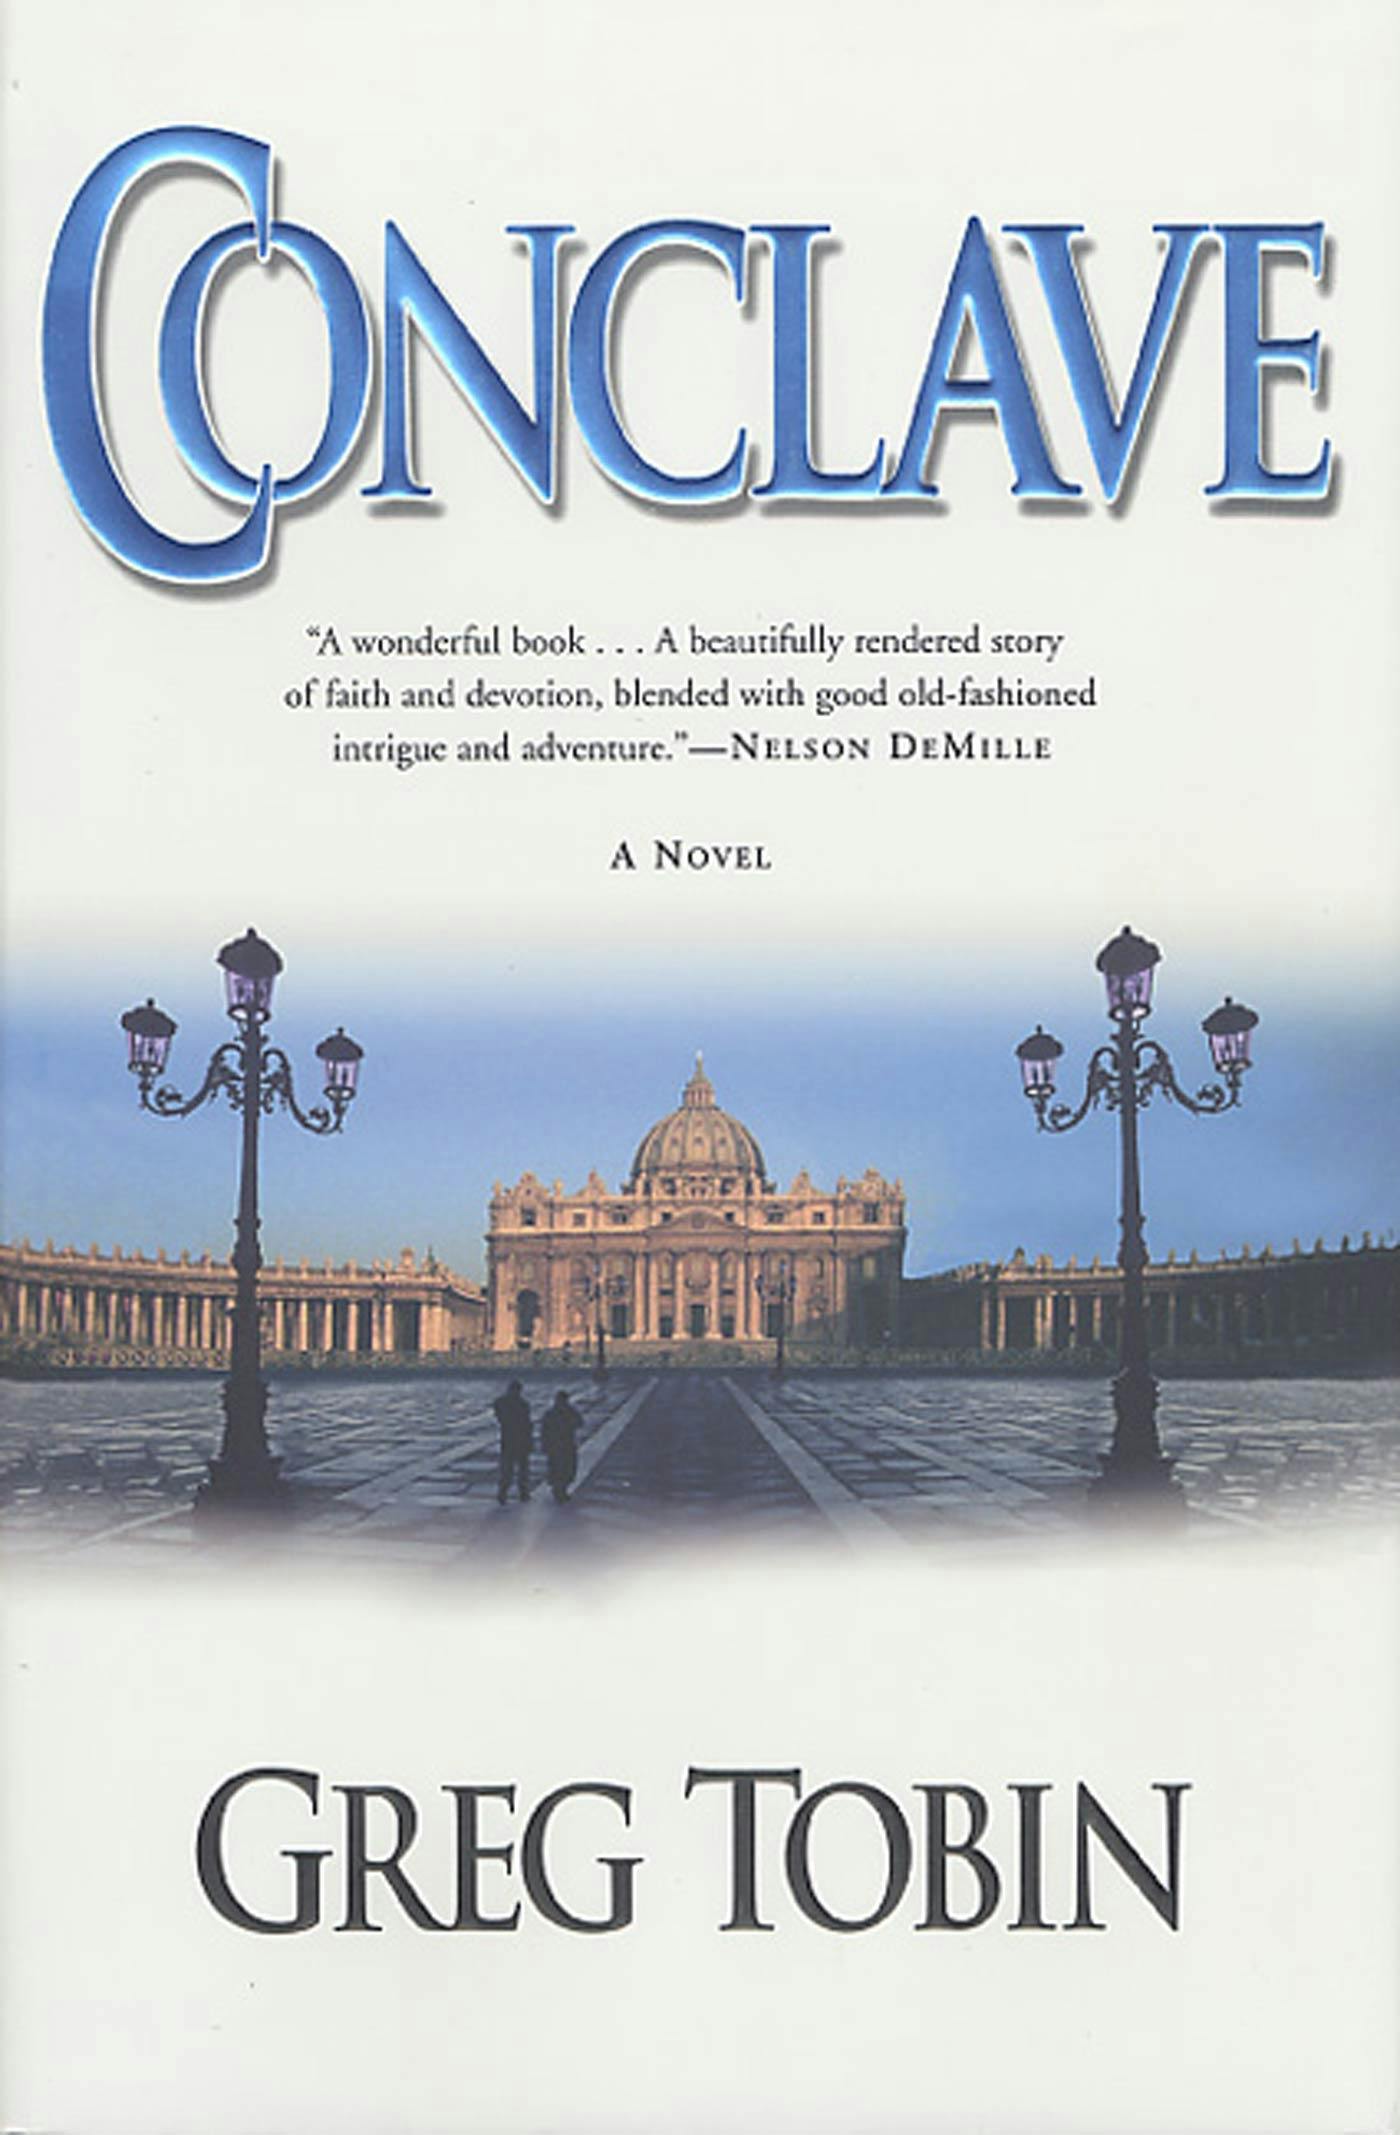 Cover for the book titled as: Conclave